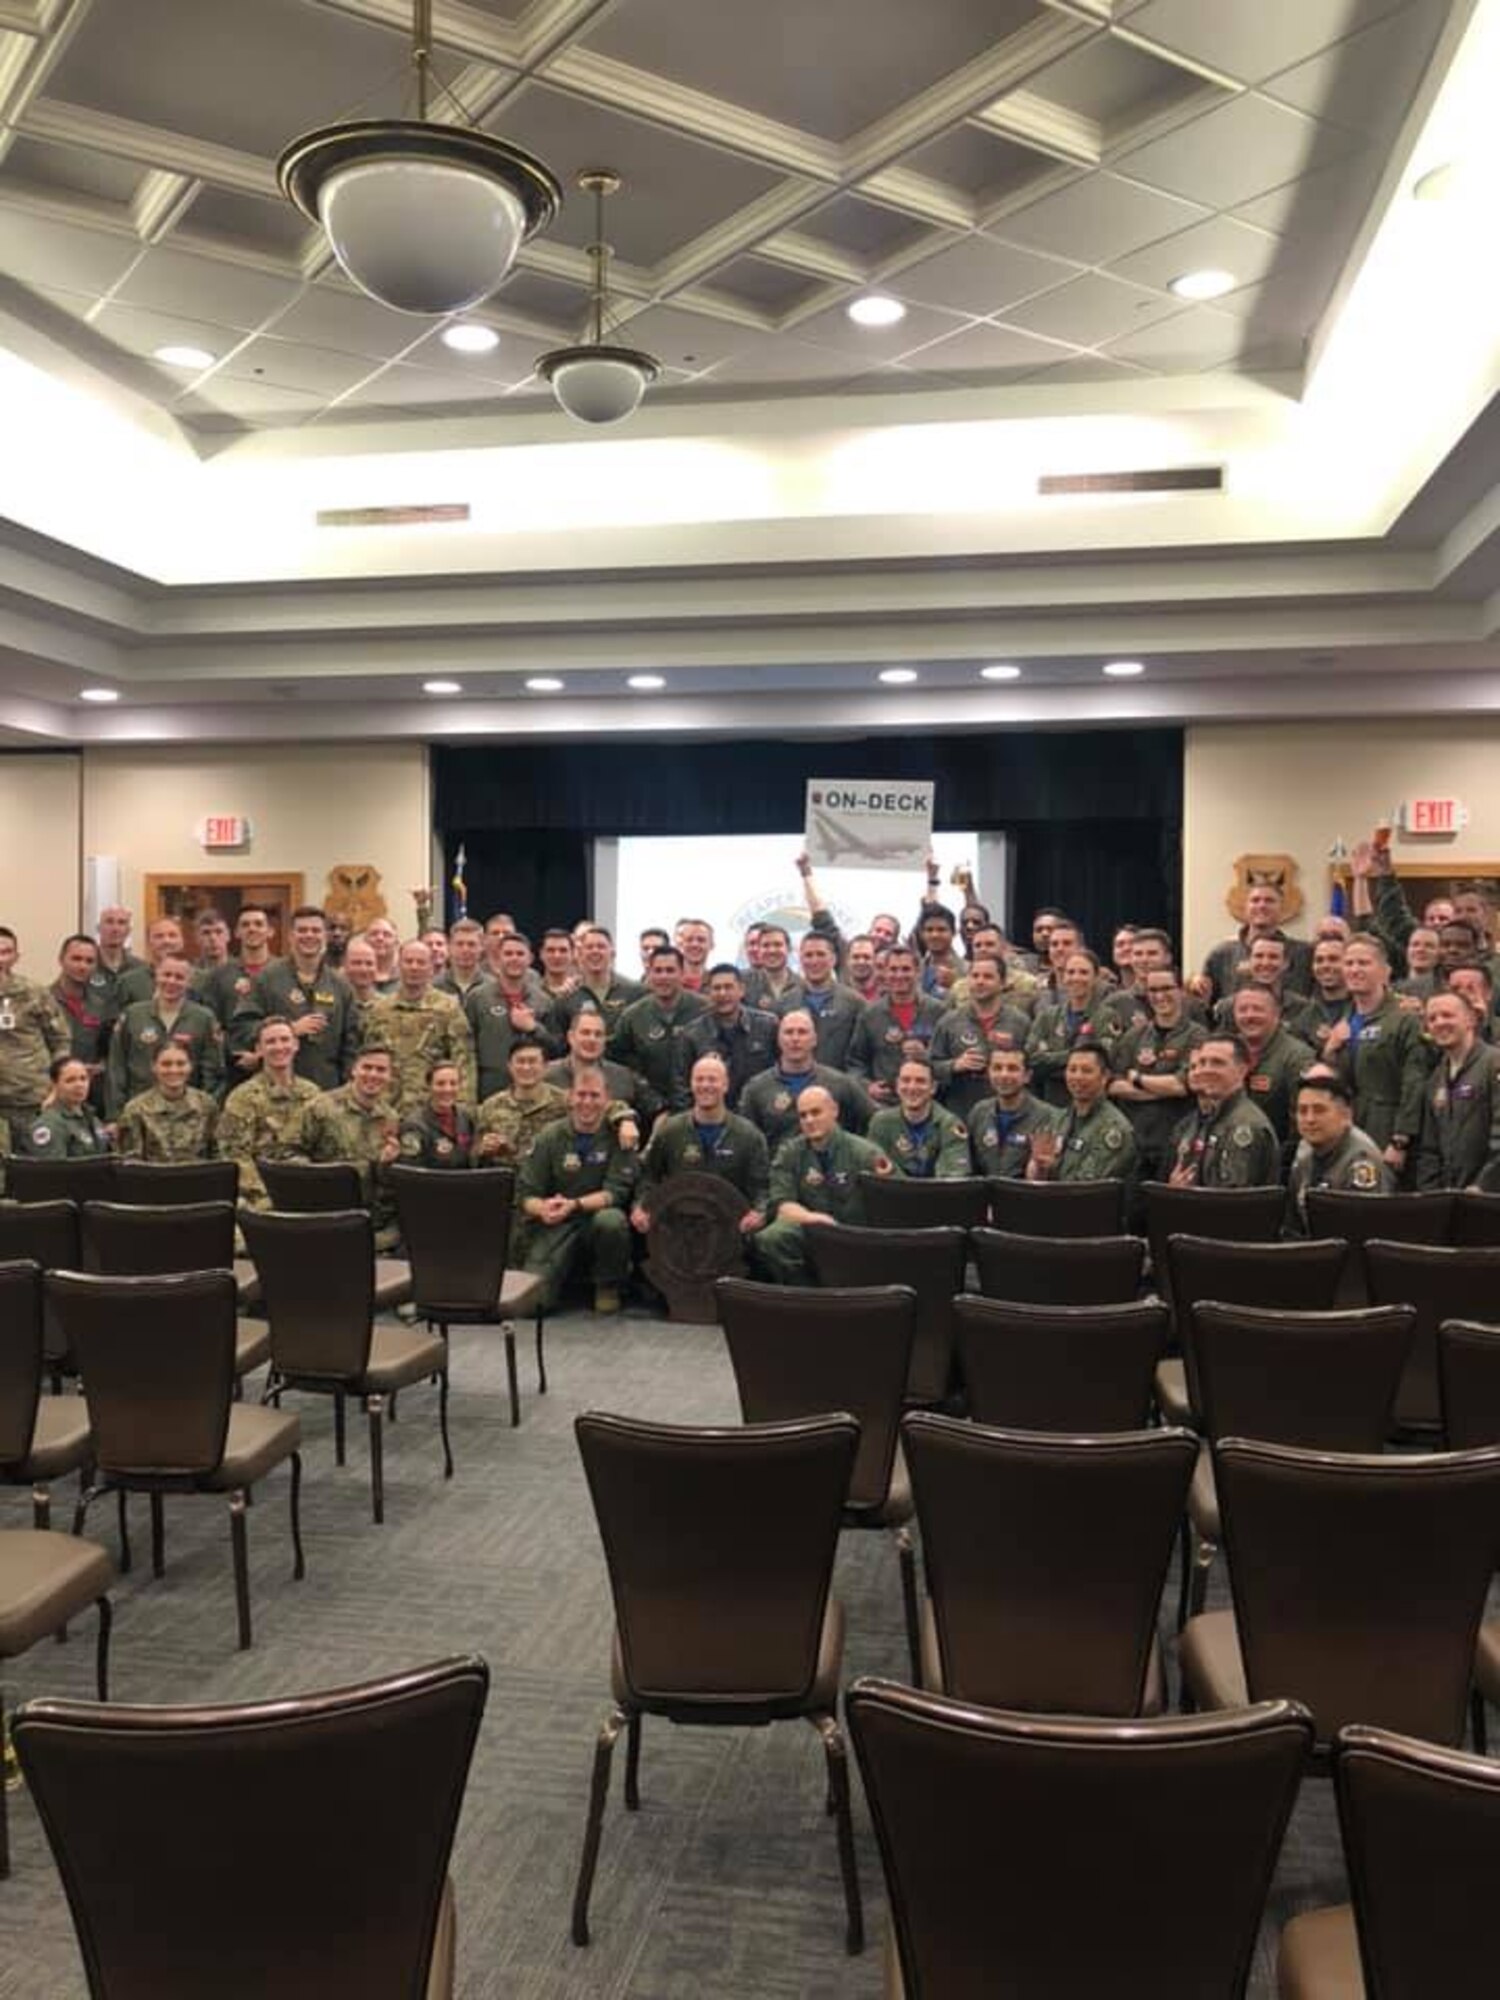 68 military members, in uniform, pose indoors at a lecture hall and holding a squadron emblem in the center of the photo with all smiles in celebration.